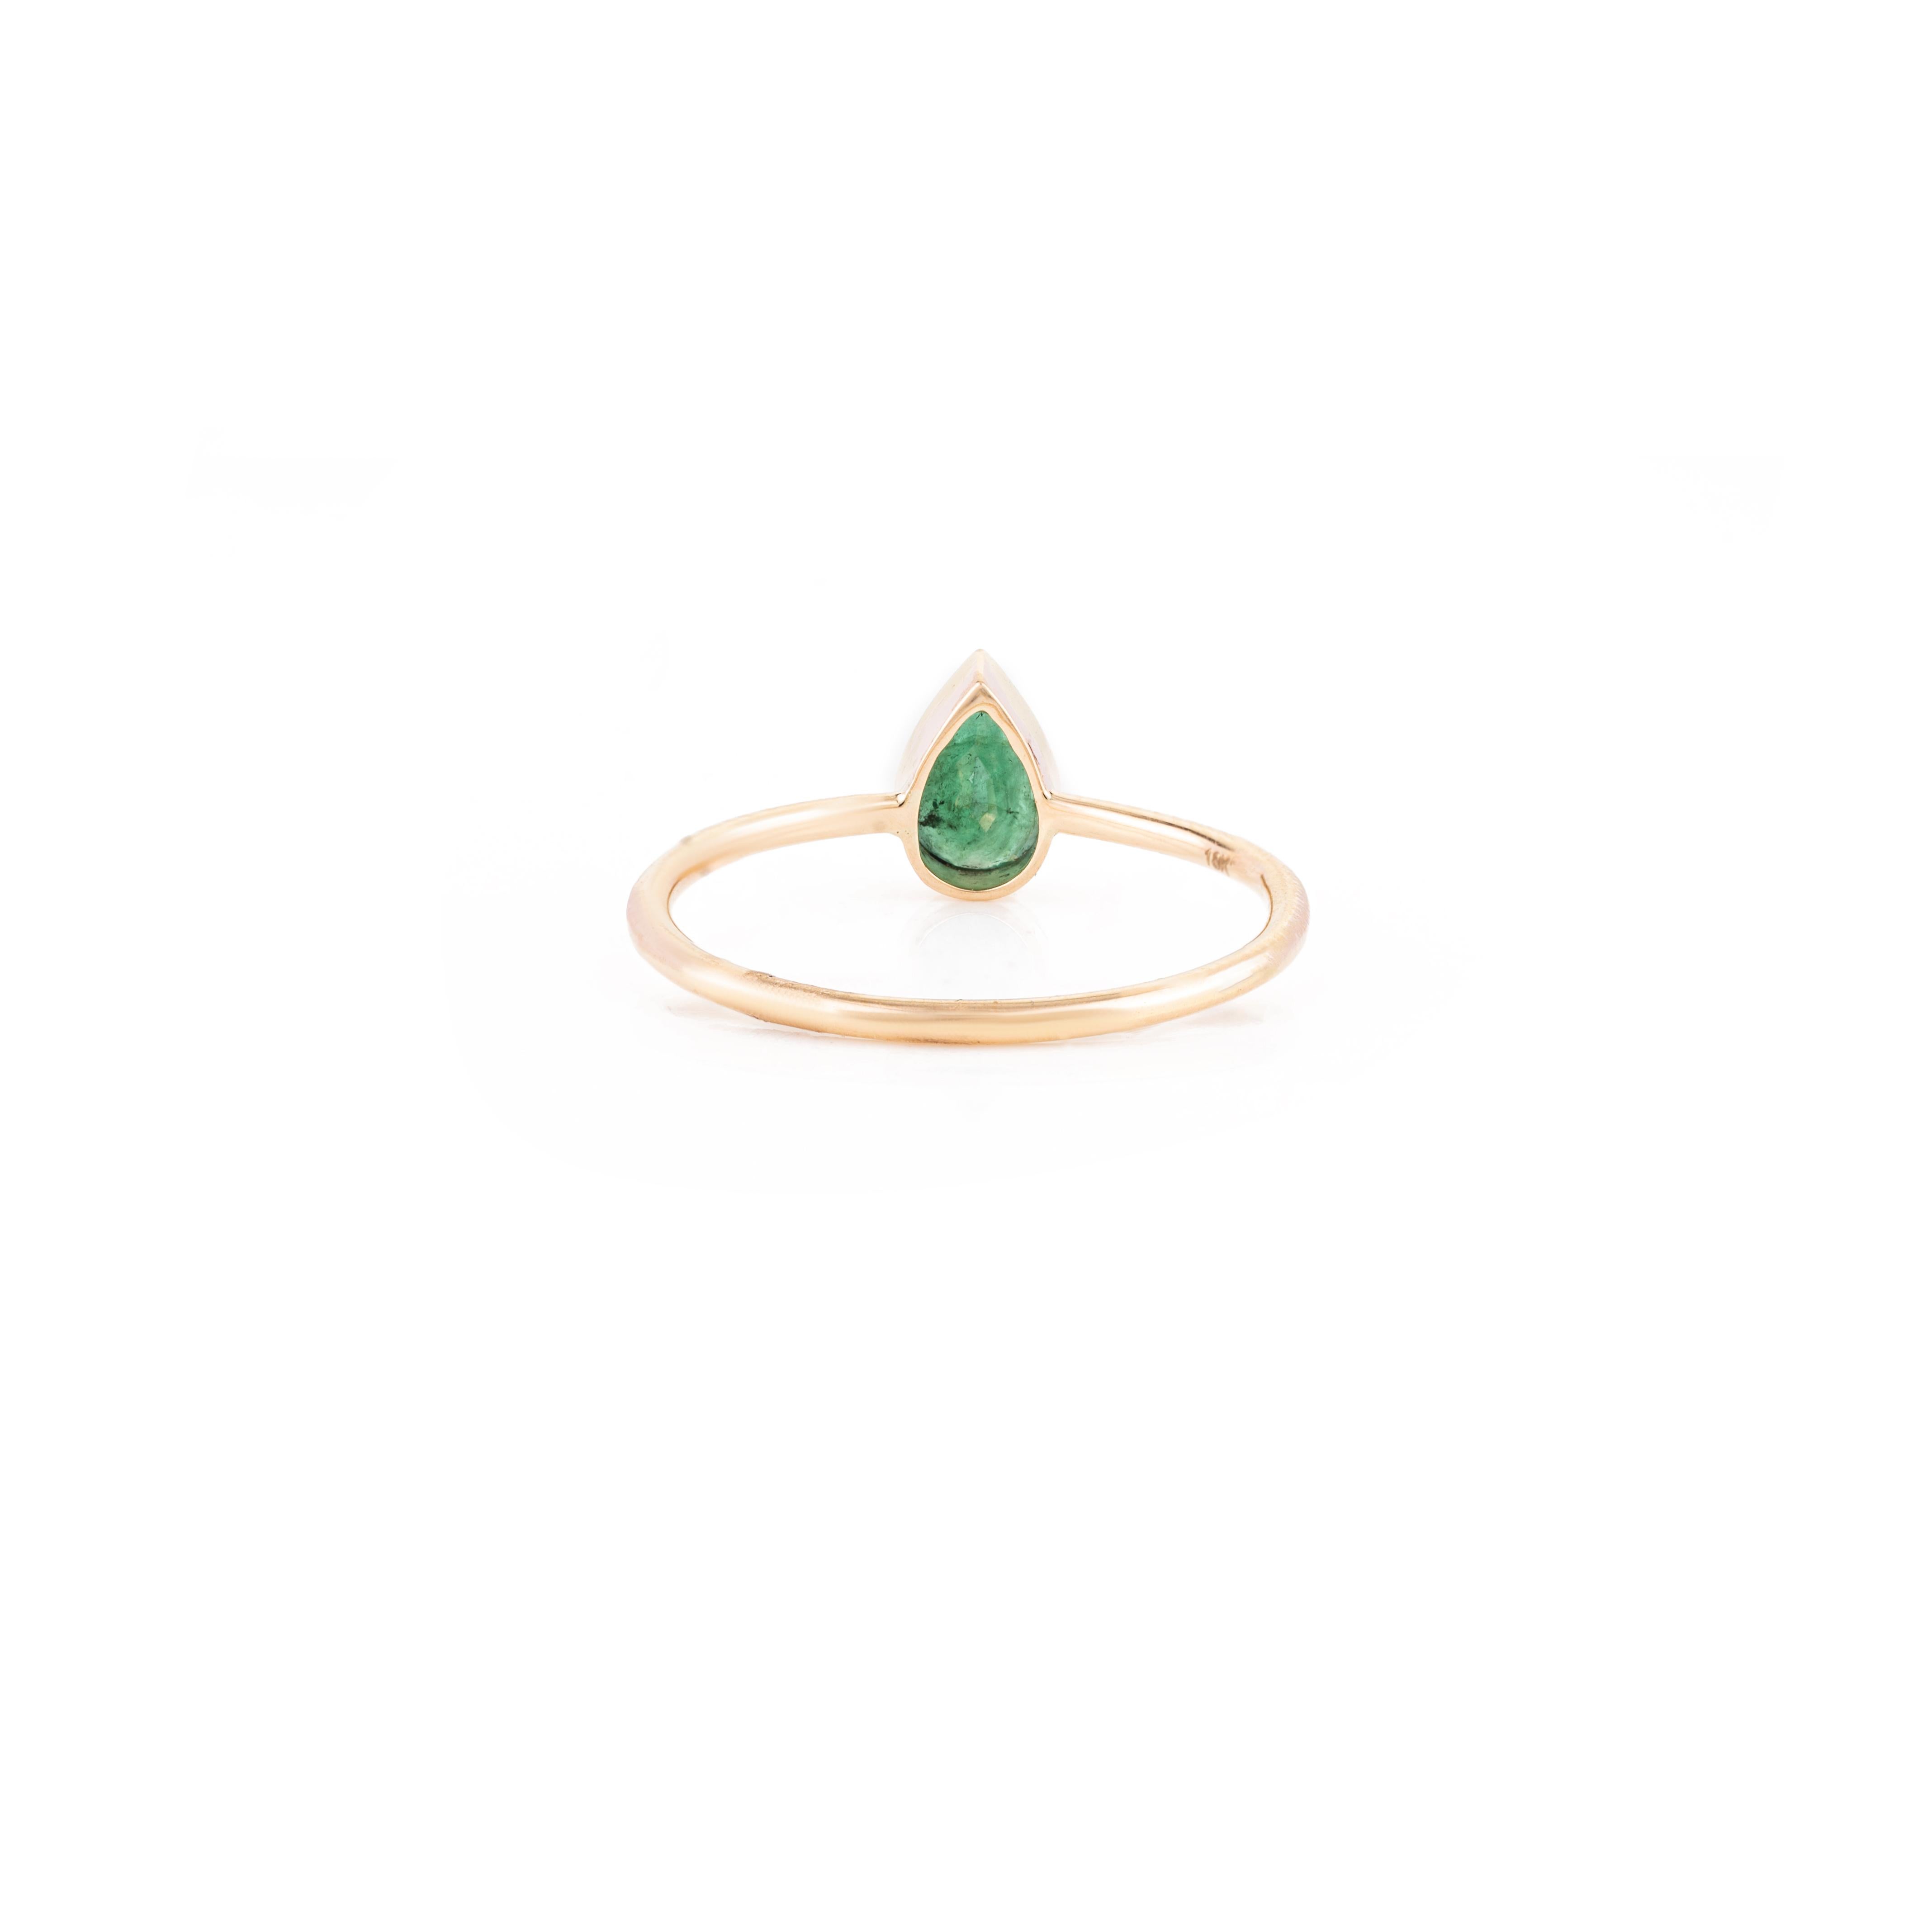 For Sale:  18k Yellow Gold Pear Bezel Set Emerald Solitaire Everyday Ring for Her 6